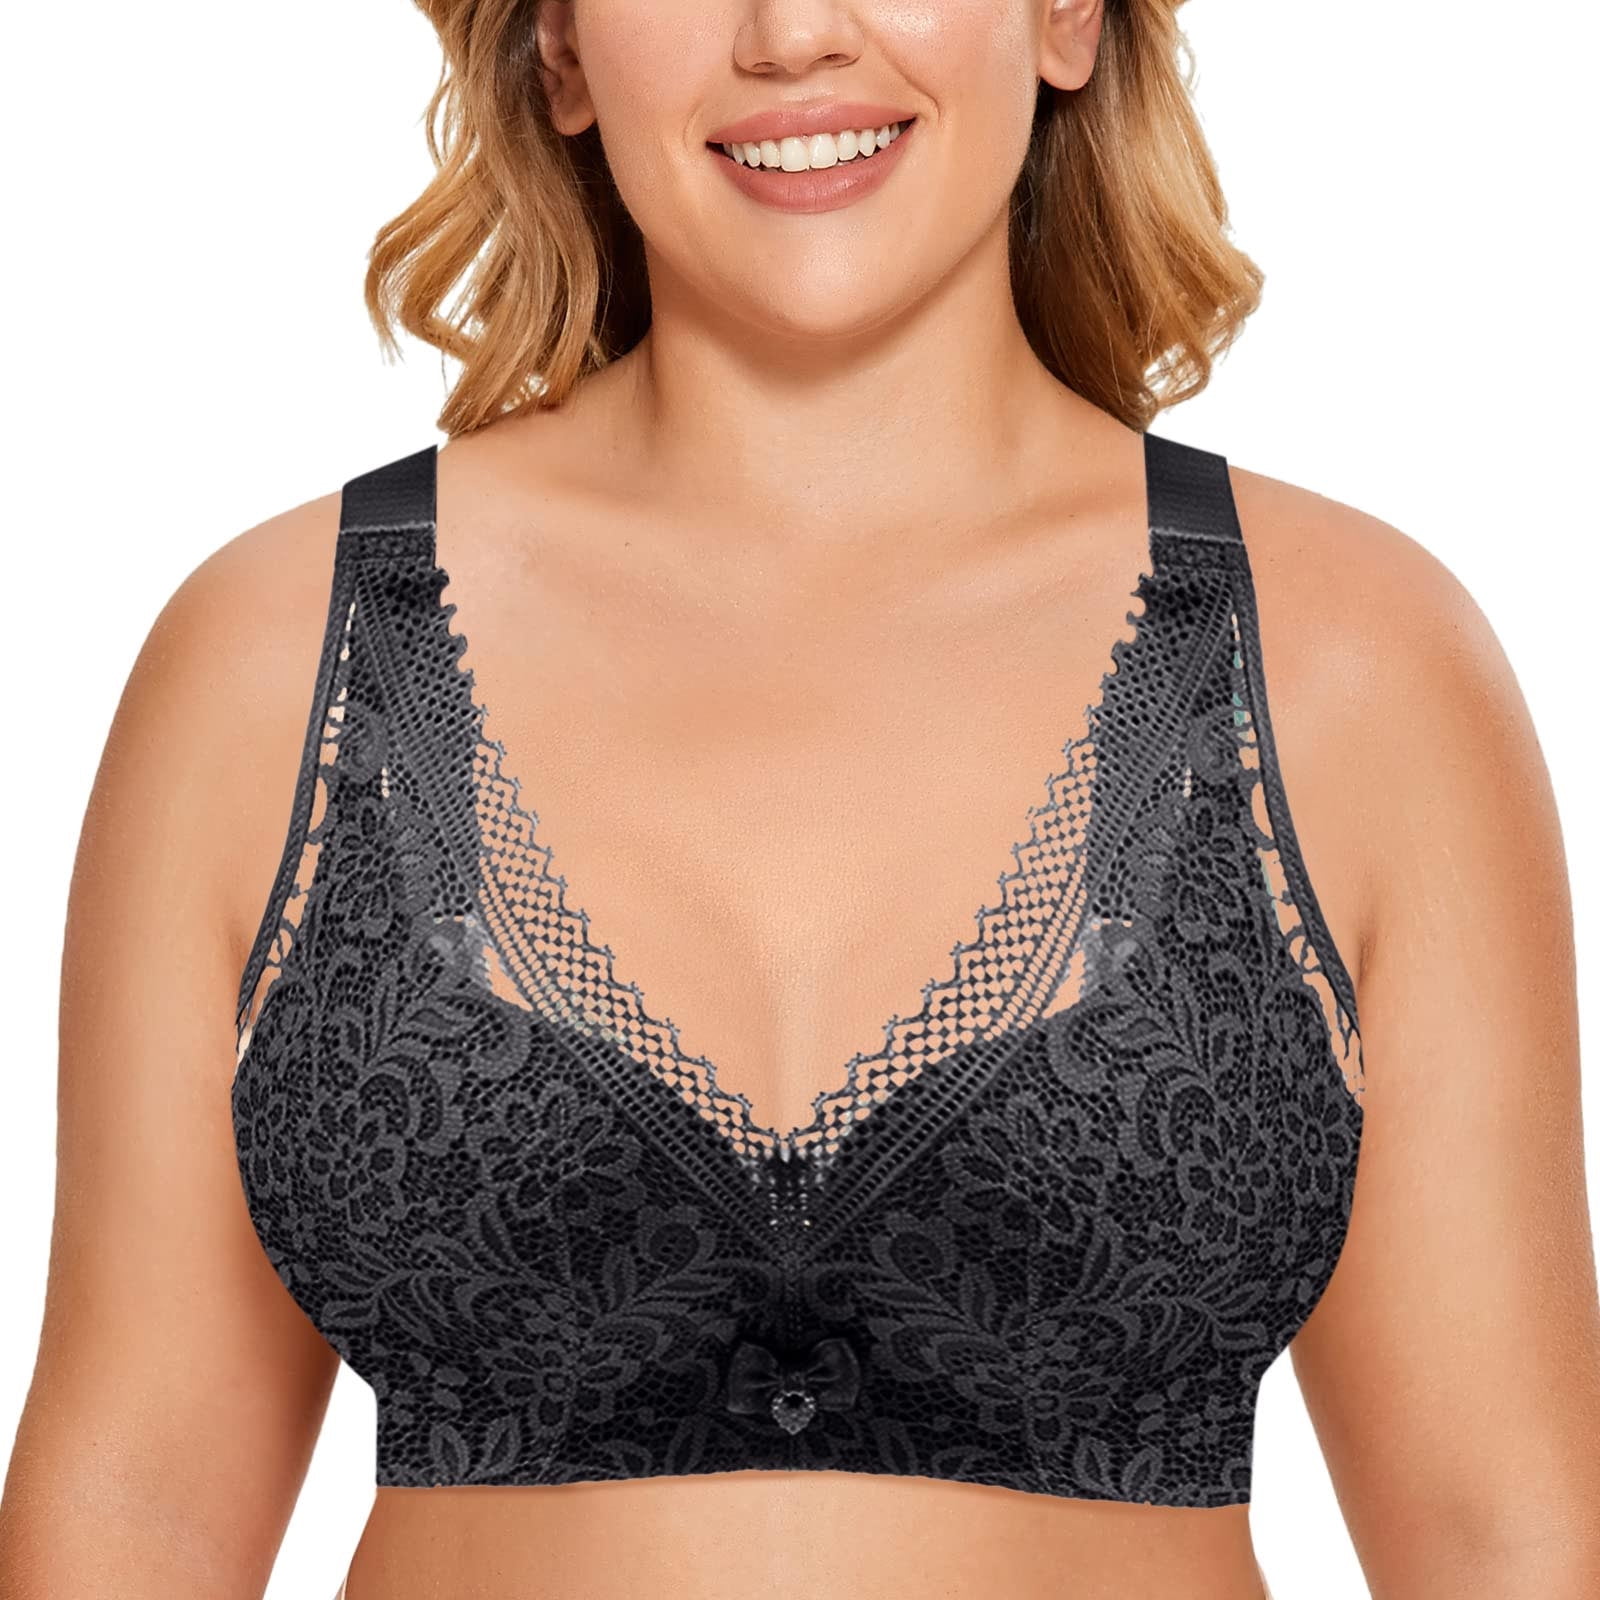 TOWED22 Bra For Women,Wireless Full Coverage Plus Size Bras for